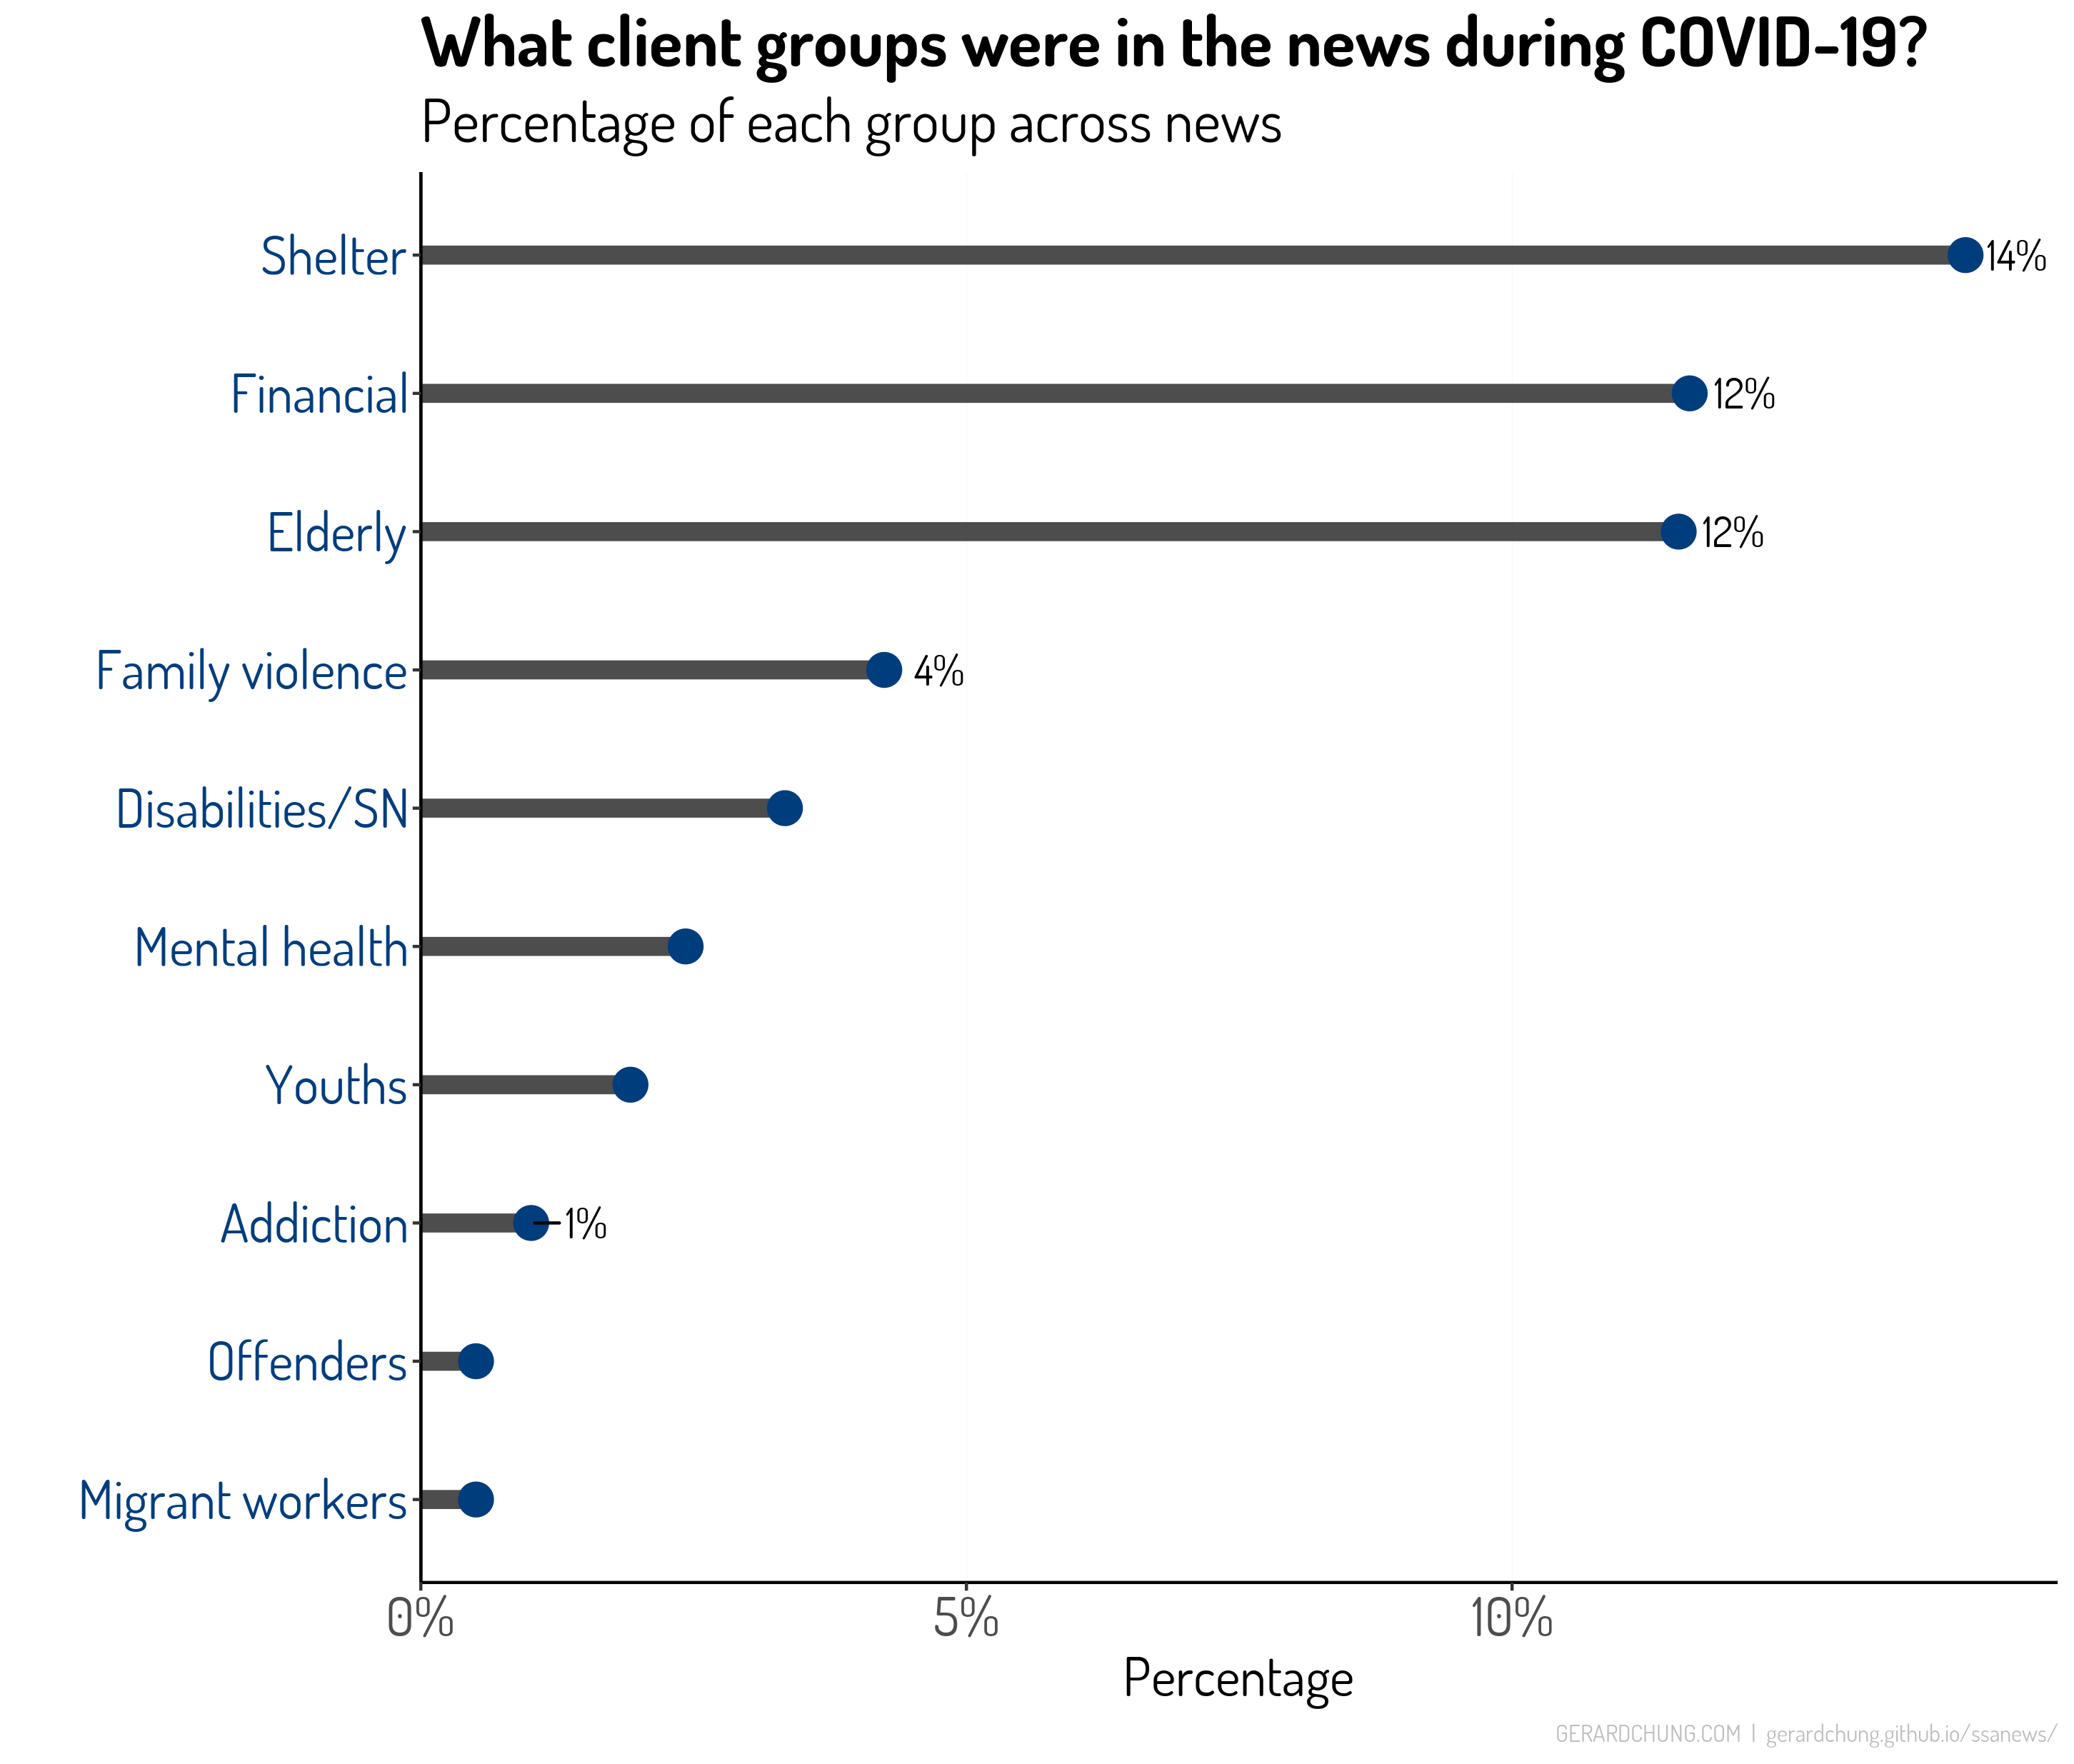 Figure 8 - Client groups in news during pandemic